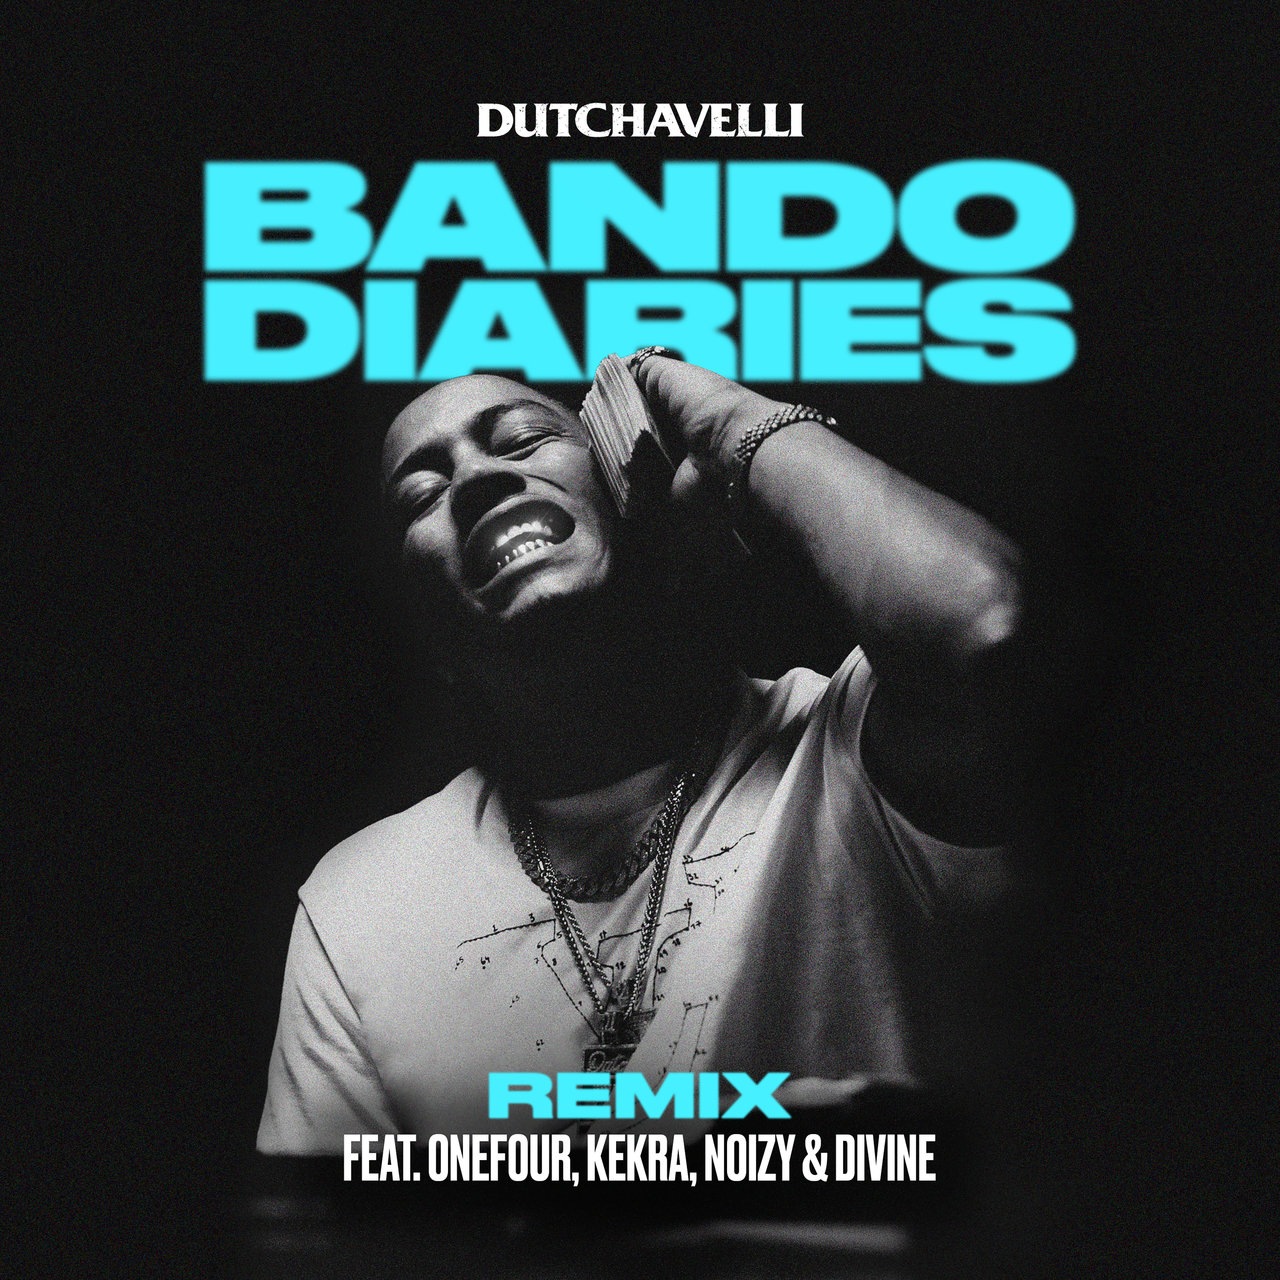 Dutchavelli - Bando Diaries (Remix) (ft. OneFour, Kekra, Noizy and Divine) (Cover)